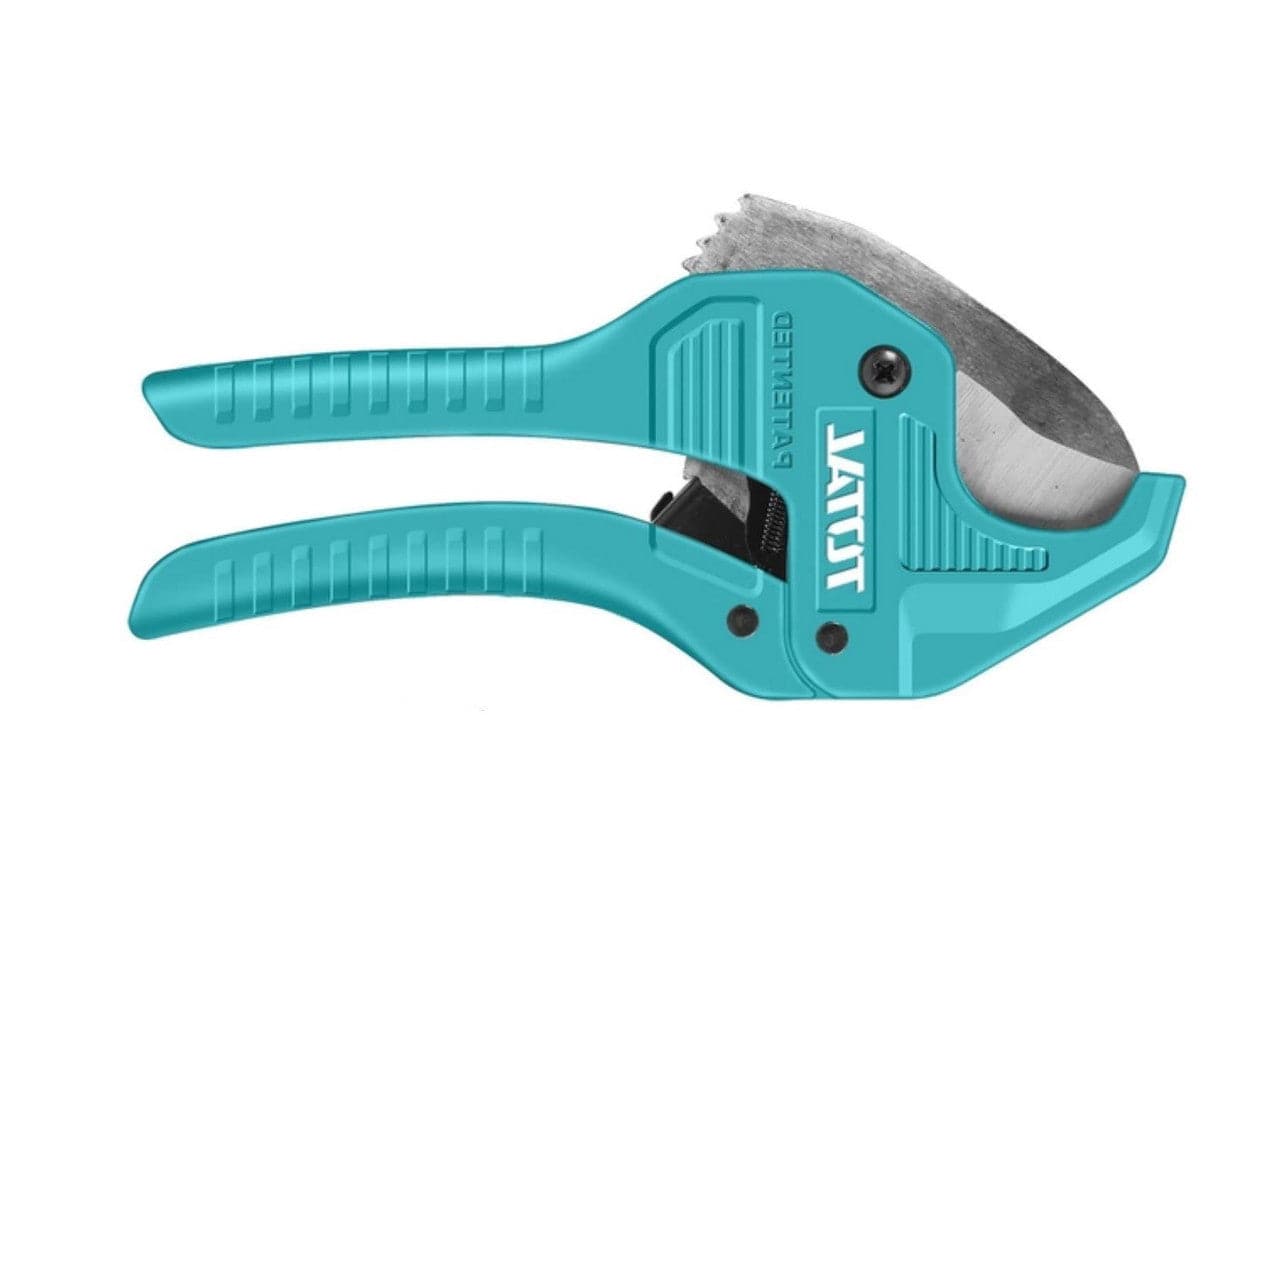 Total PVC Pipe Cutter 193mm - THT534216 | Supply Master | Accra, Ghana Hand Saws & Cutting Tools Buy Tools hardware Building materials